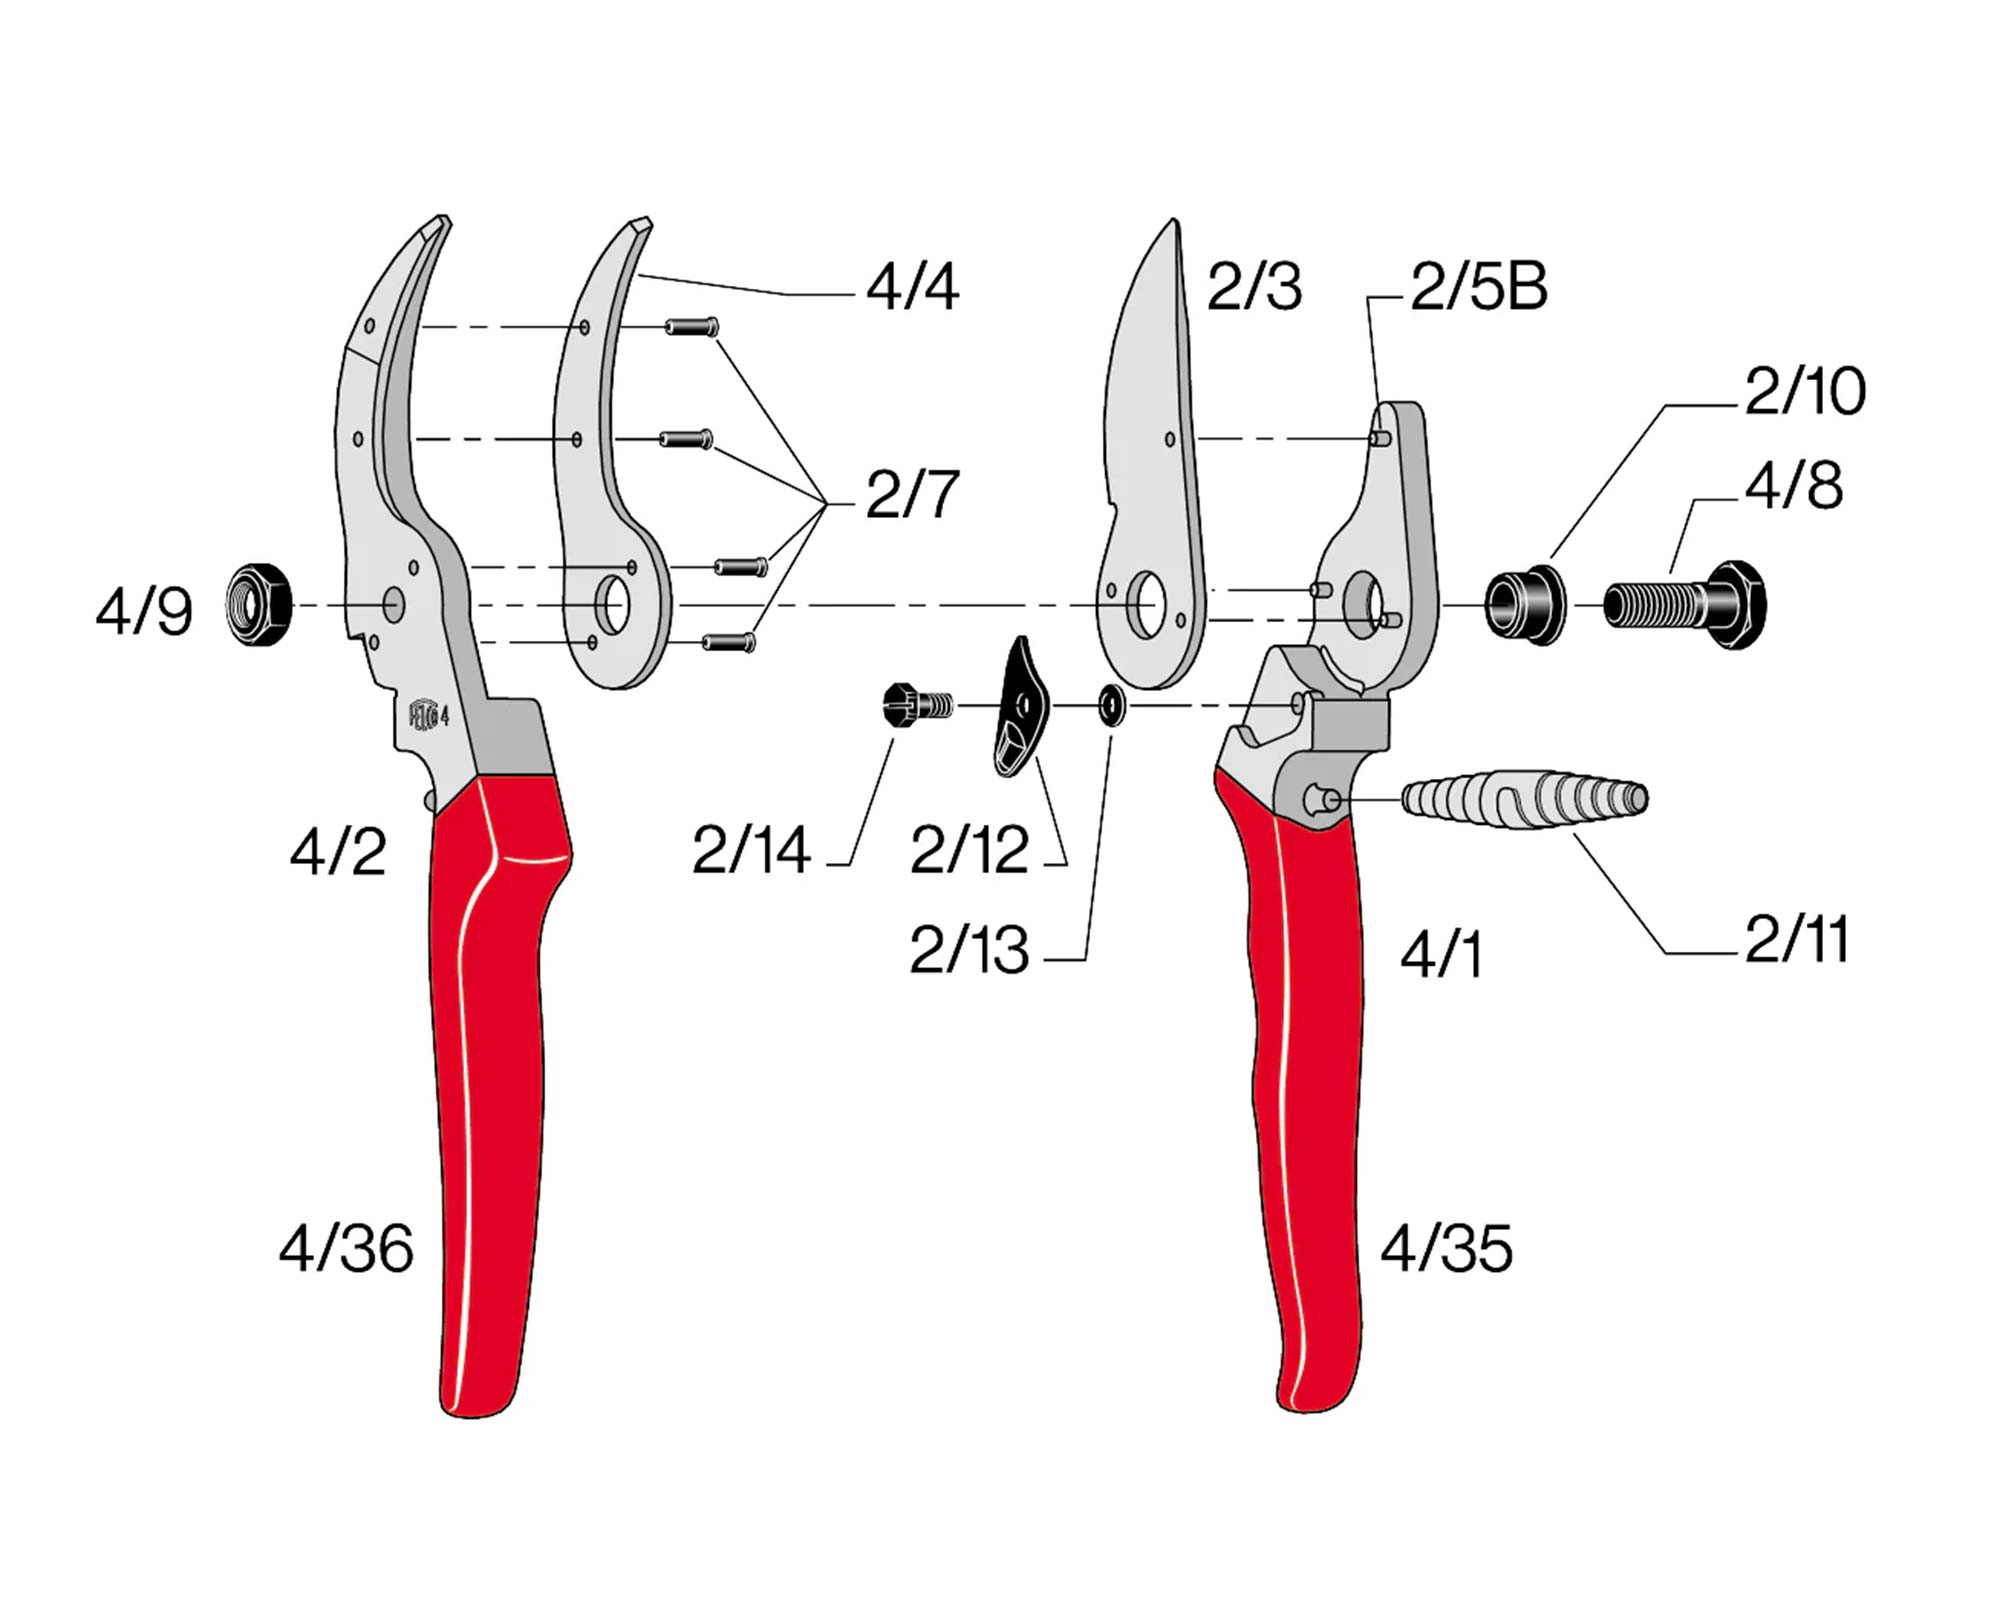 Felco 4 diagram of parts - showing the replaceable anvil blade  - part #4/4 and associated rivets